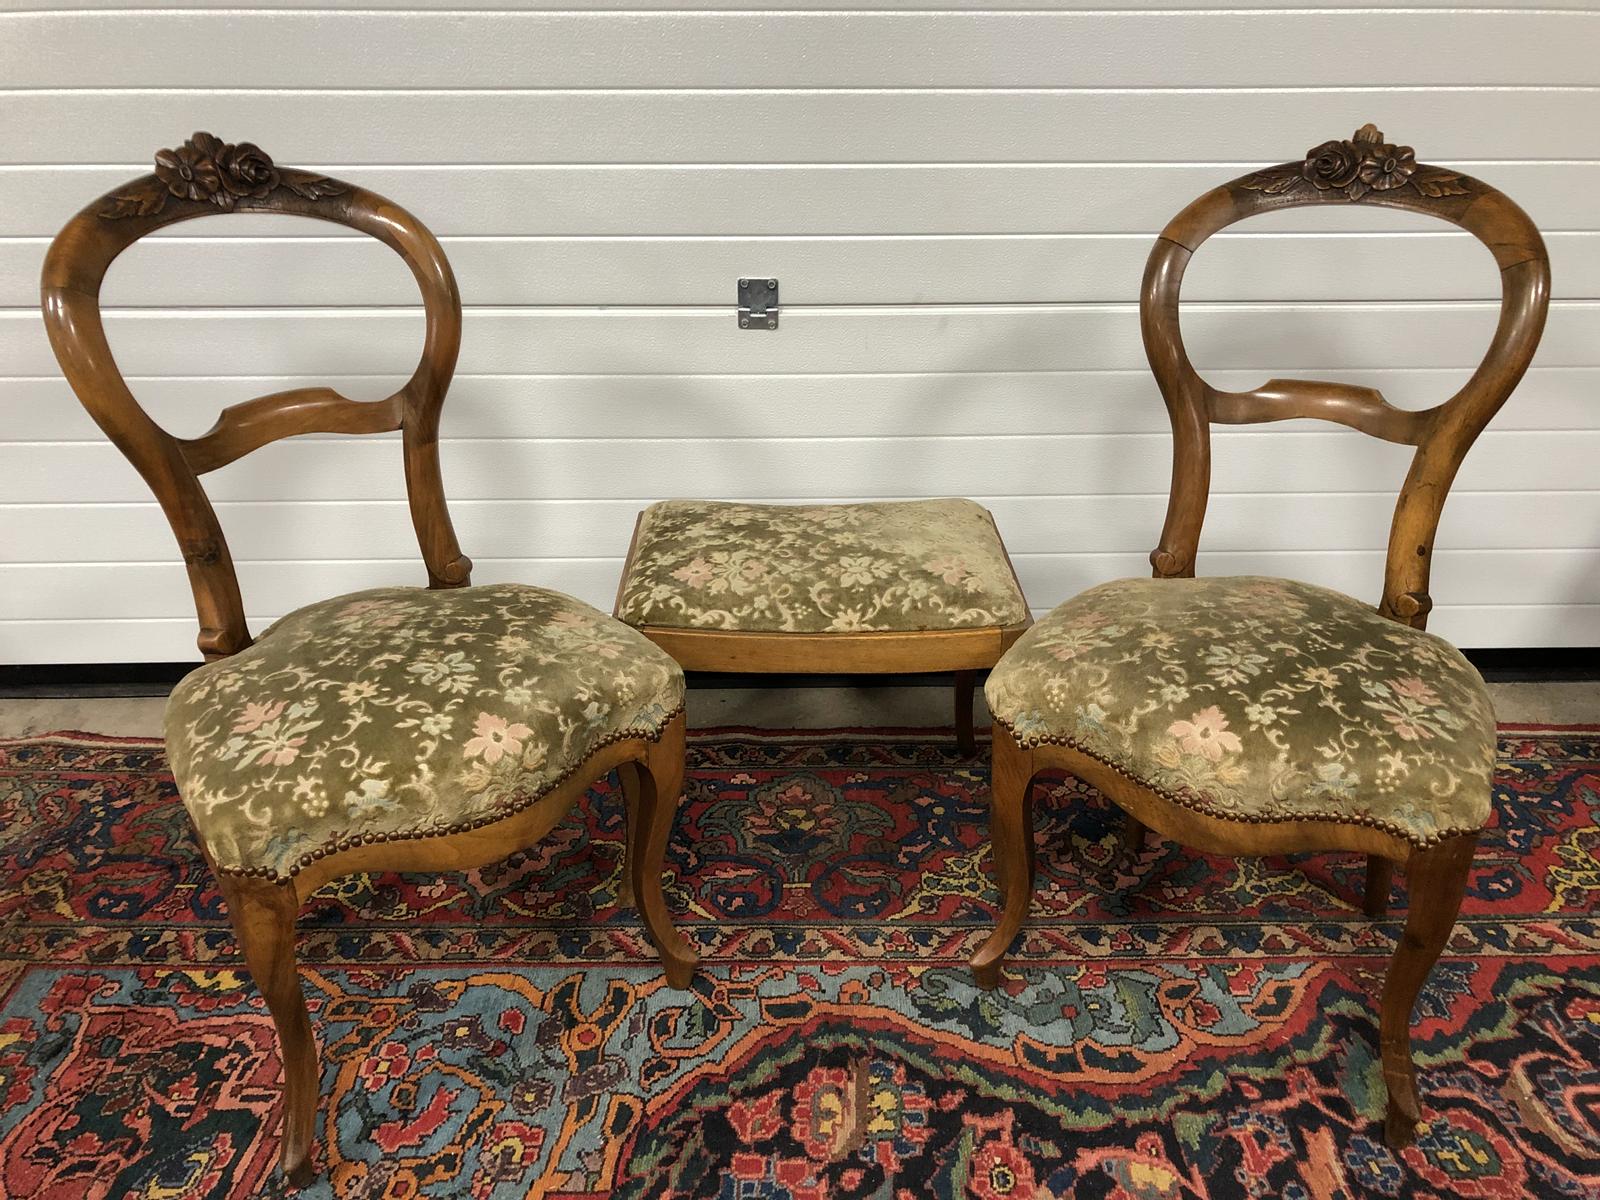 VINTAGE BALLOON BACK CARVED FLORAL UPHOLSTERED CHAIRS WITH MATCHING FOOT STOOLS